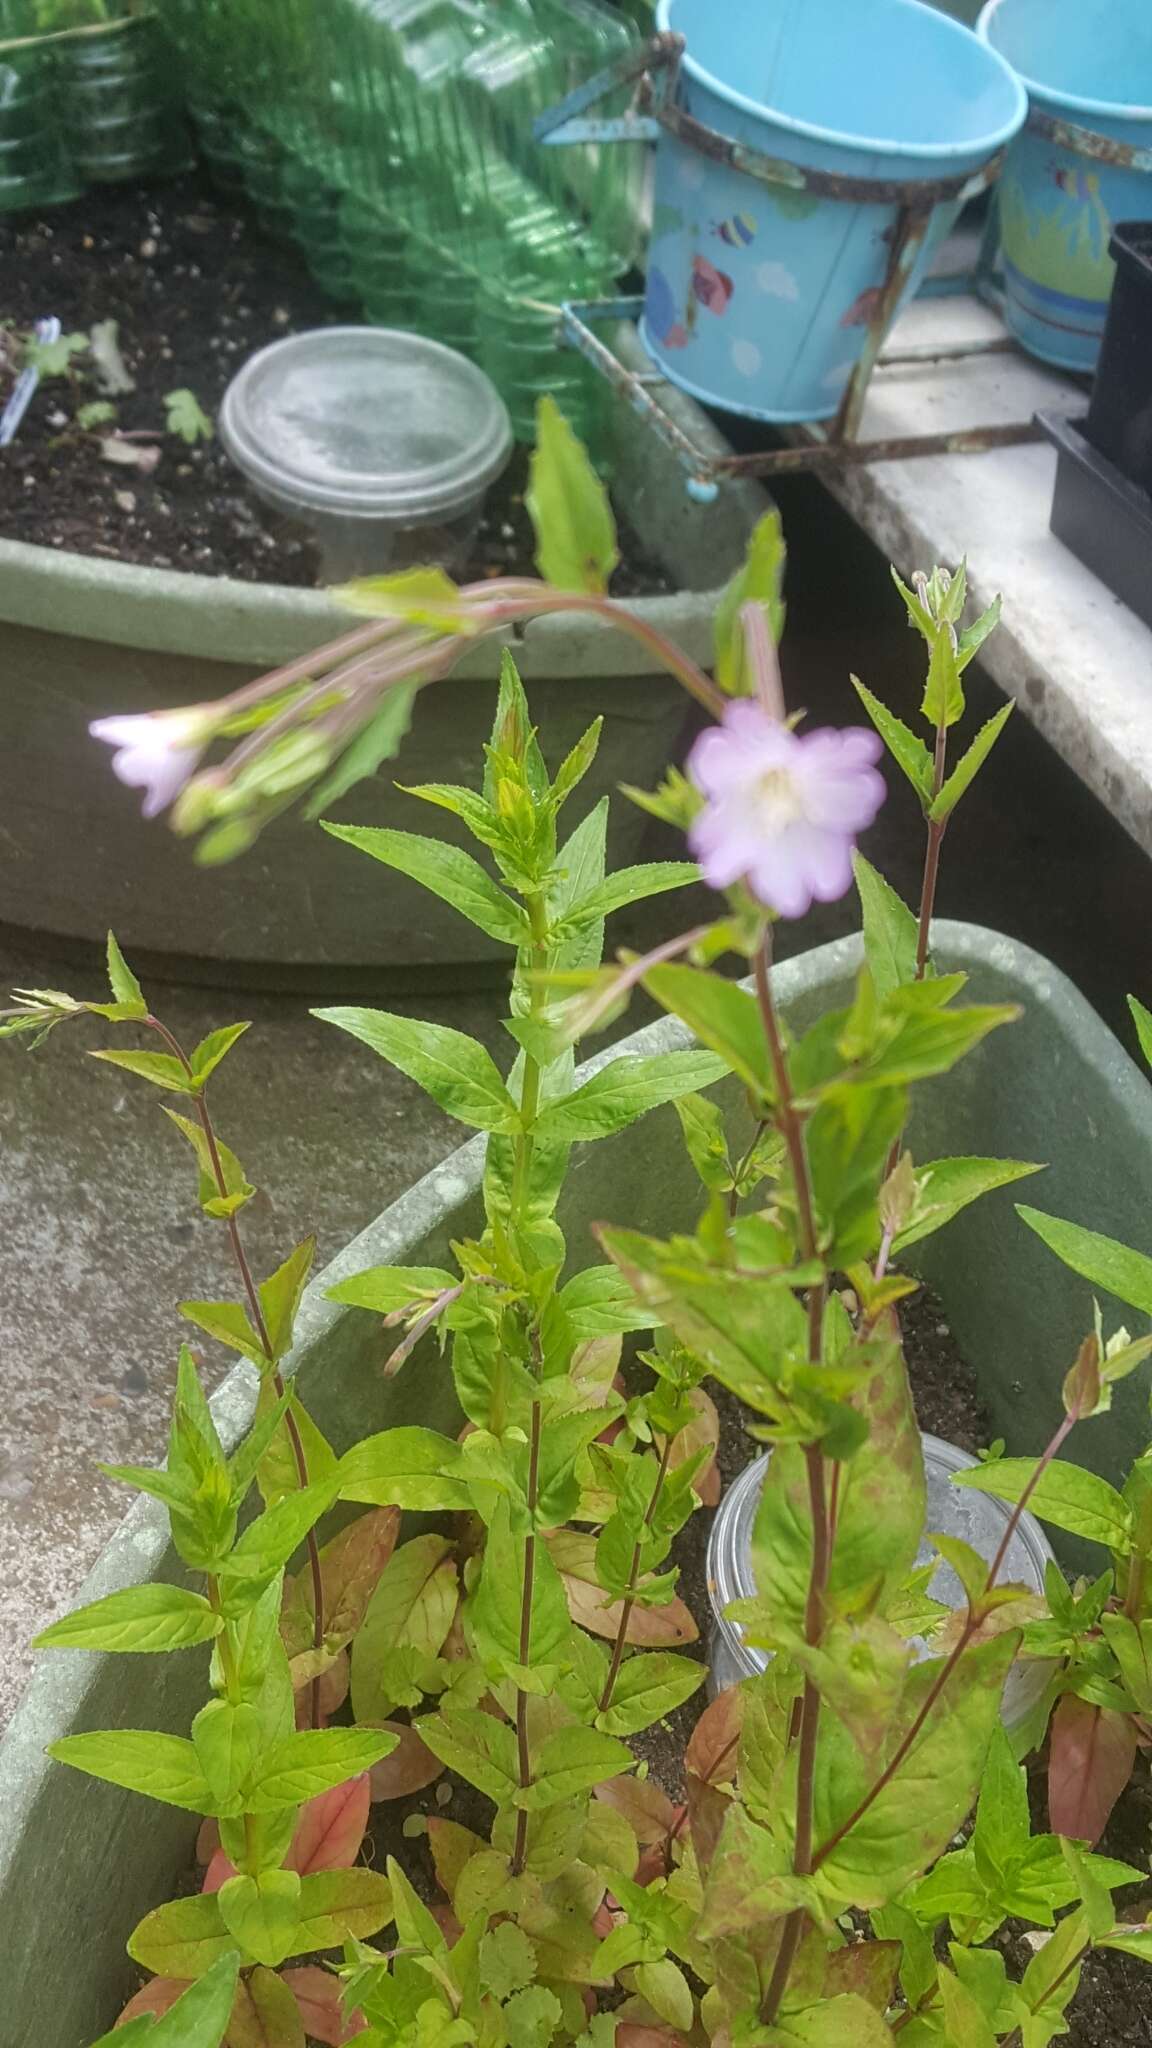 Image of Broad-leaved Willowherb